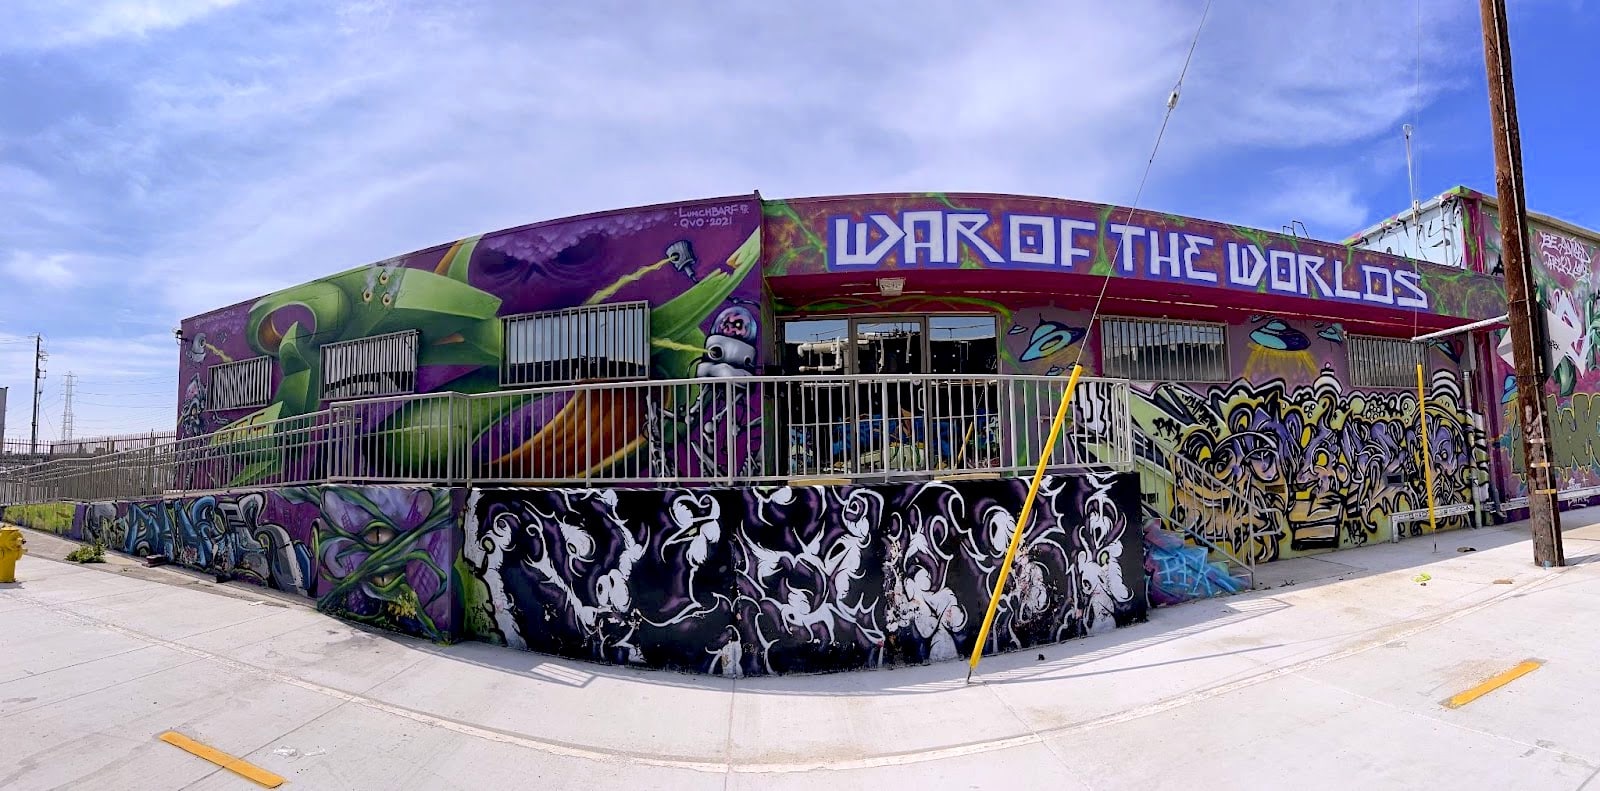 Graffiti showing a depiction of the War of the Worlds